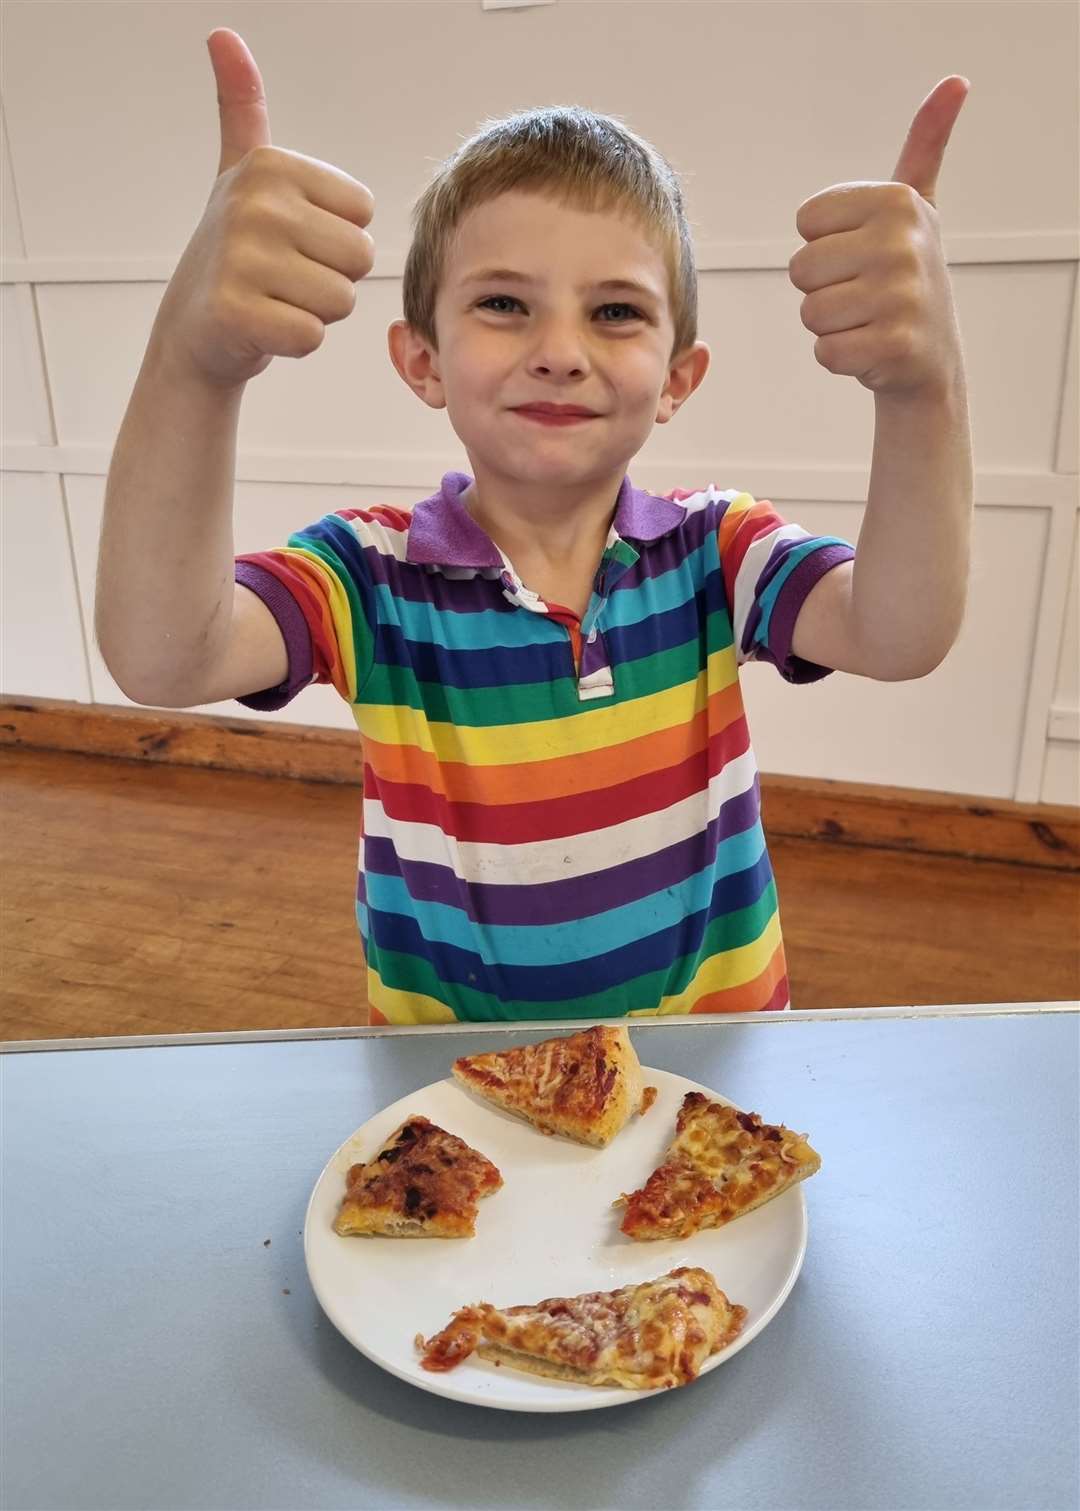 Adam Ross gives a thumbs-up to the delicious pizza he made.